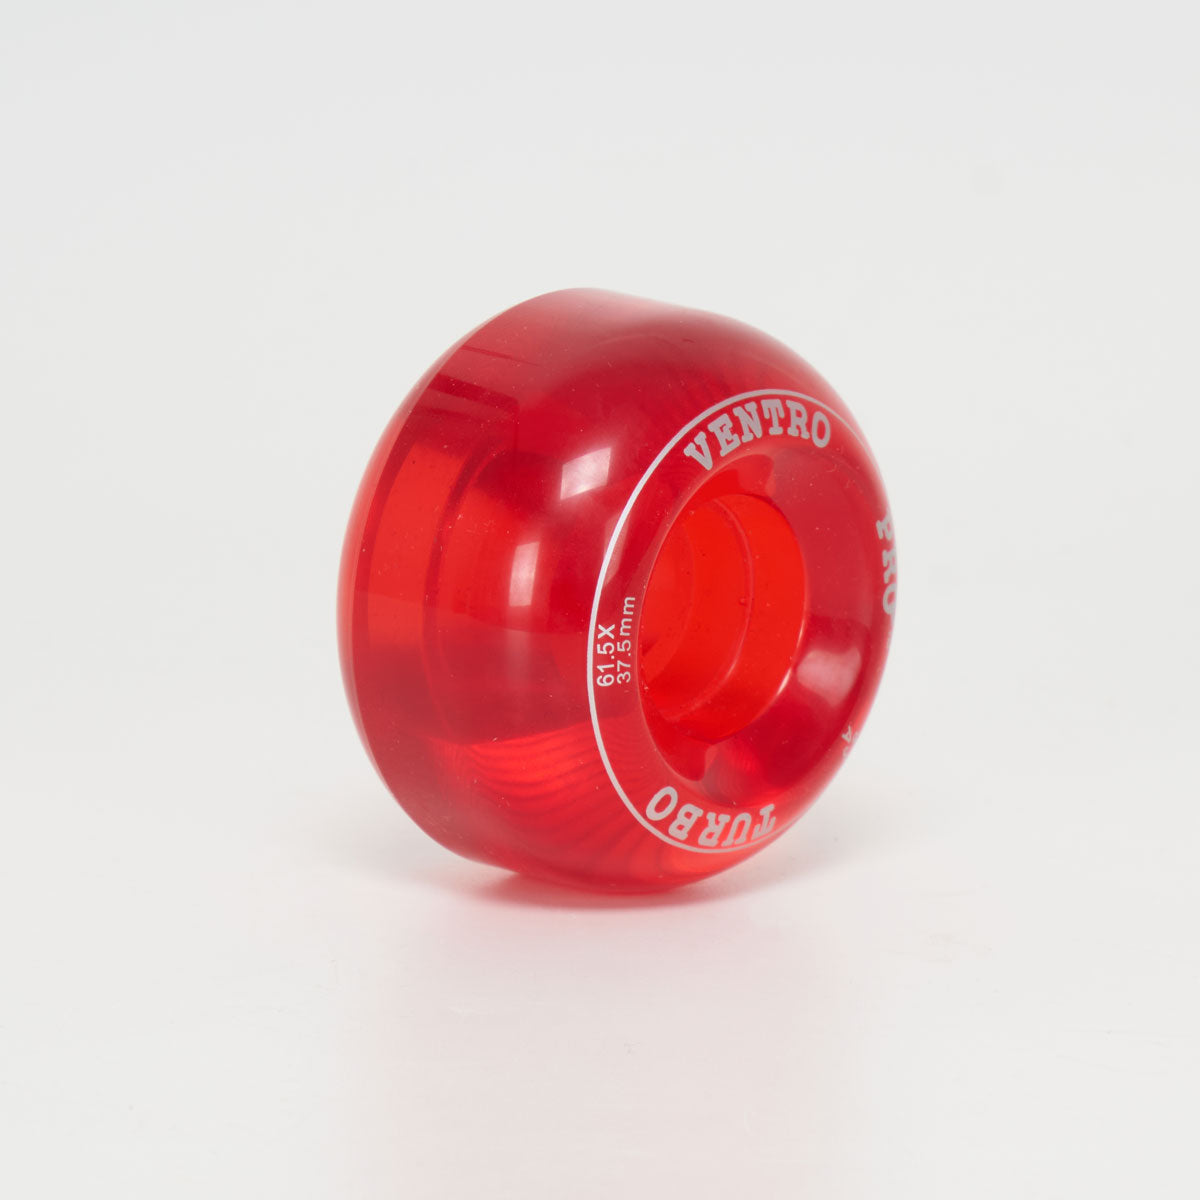 Ventro Pro 61.5mm/83a Wheels - Red (Singles)